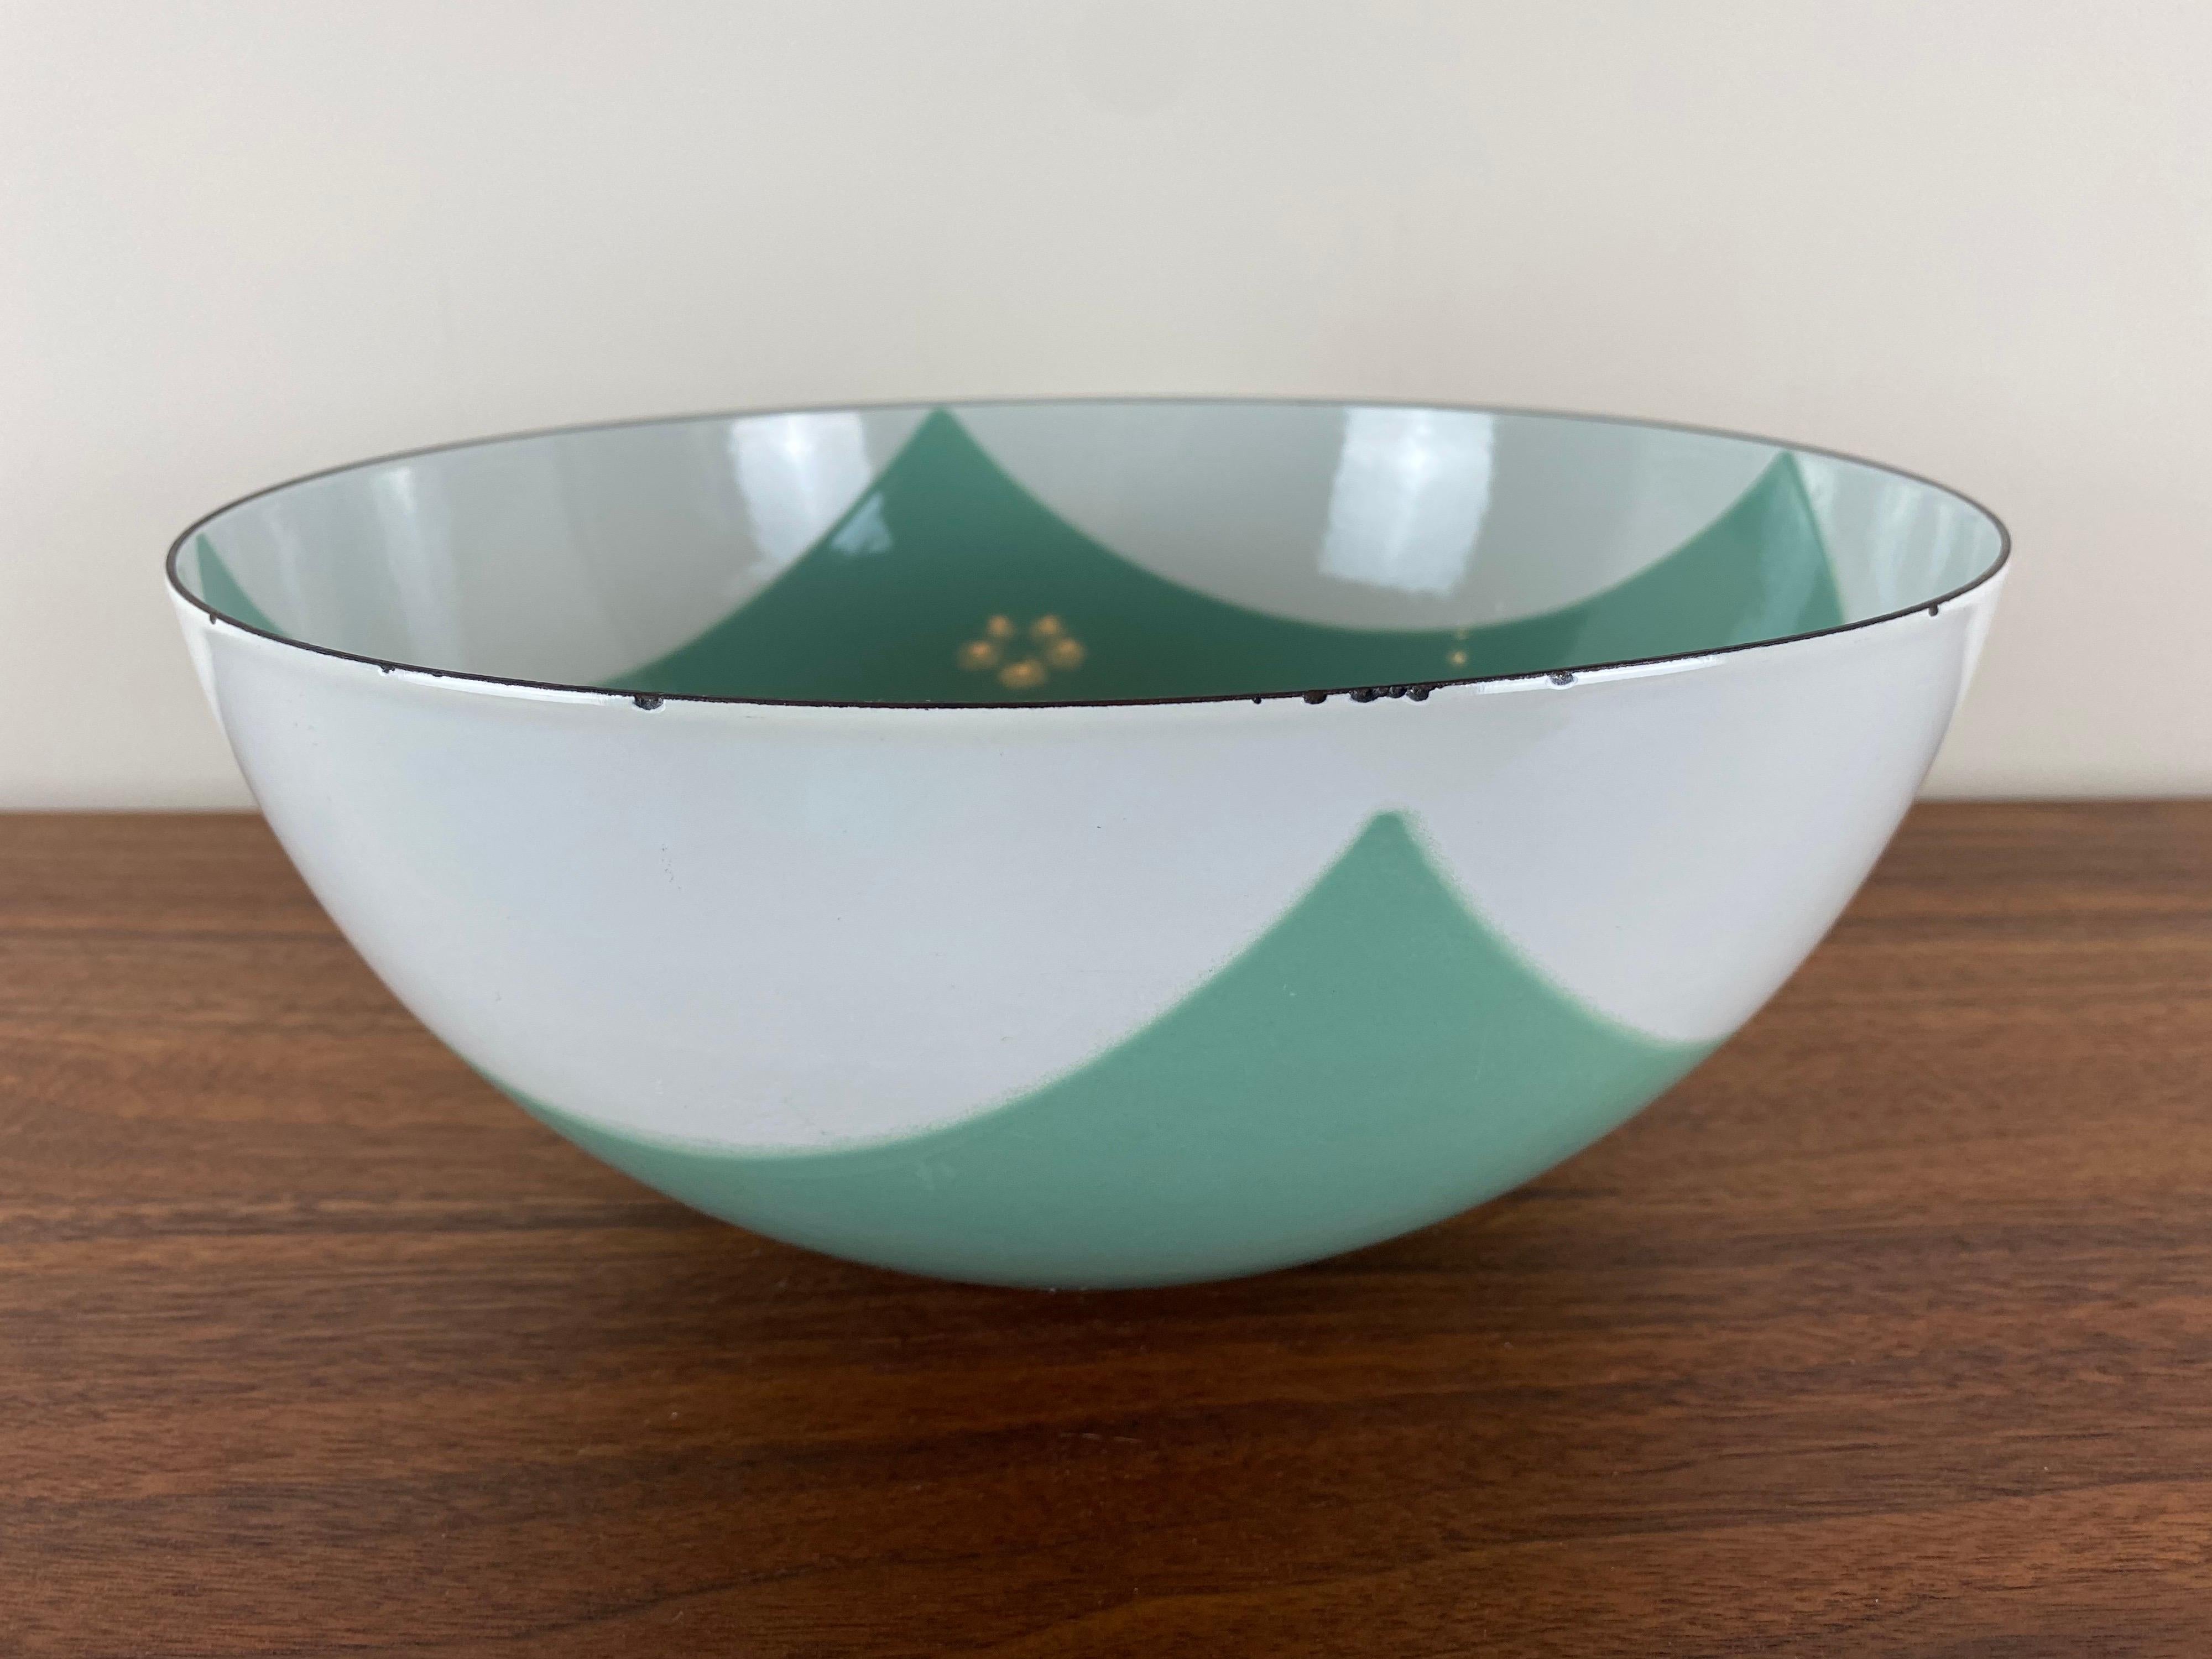 This is the largest of the Catherineholm collection flag bowls. This example is a rare seafoam green and white enamel.